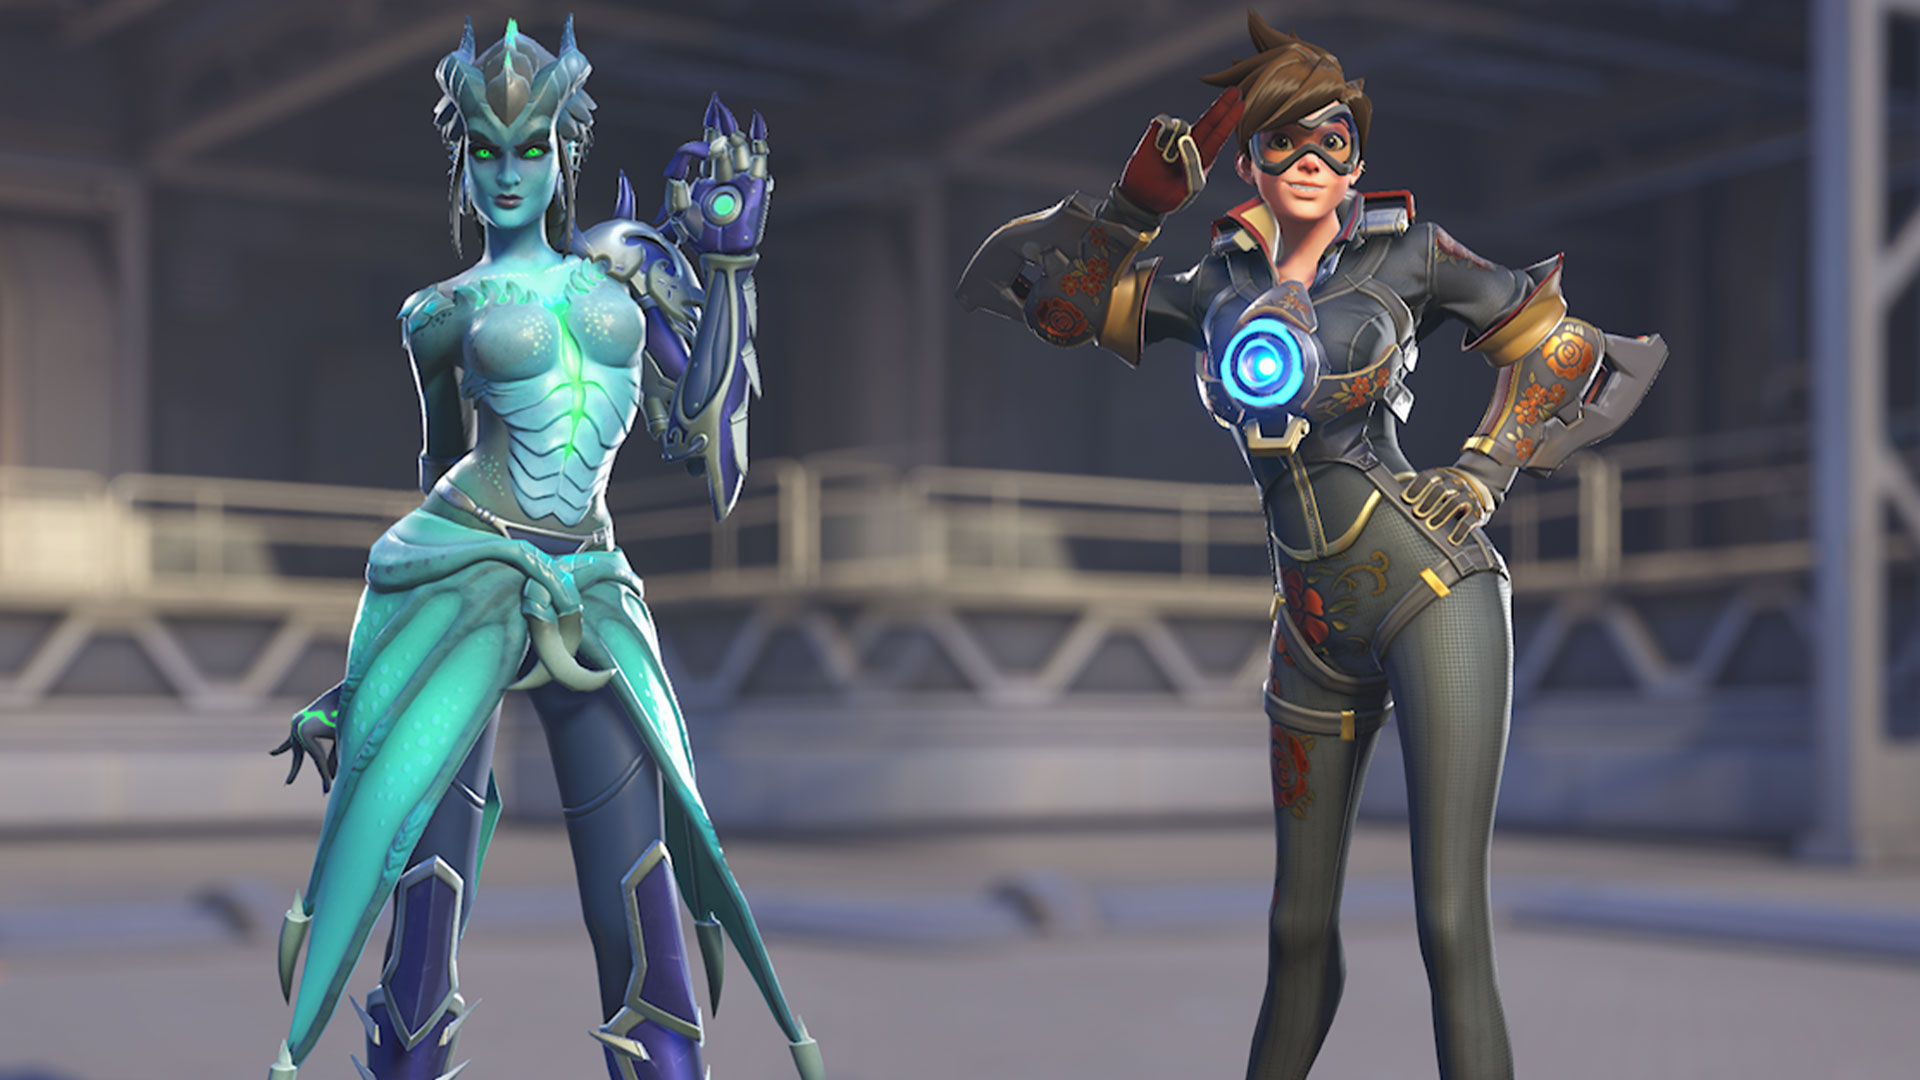 Overwatch 2 is Giving Away a Free Legendary Tracer Skin for a